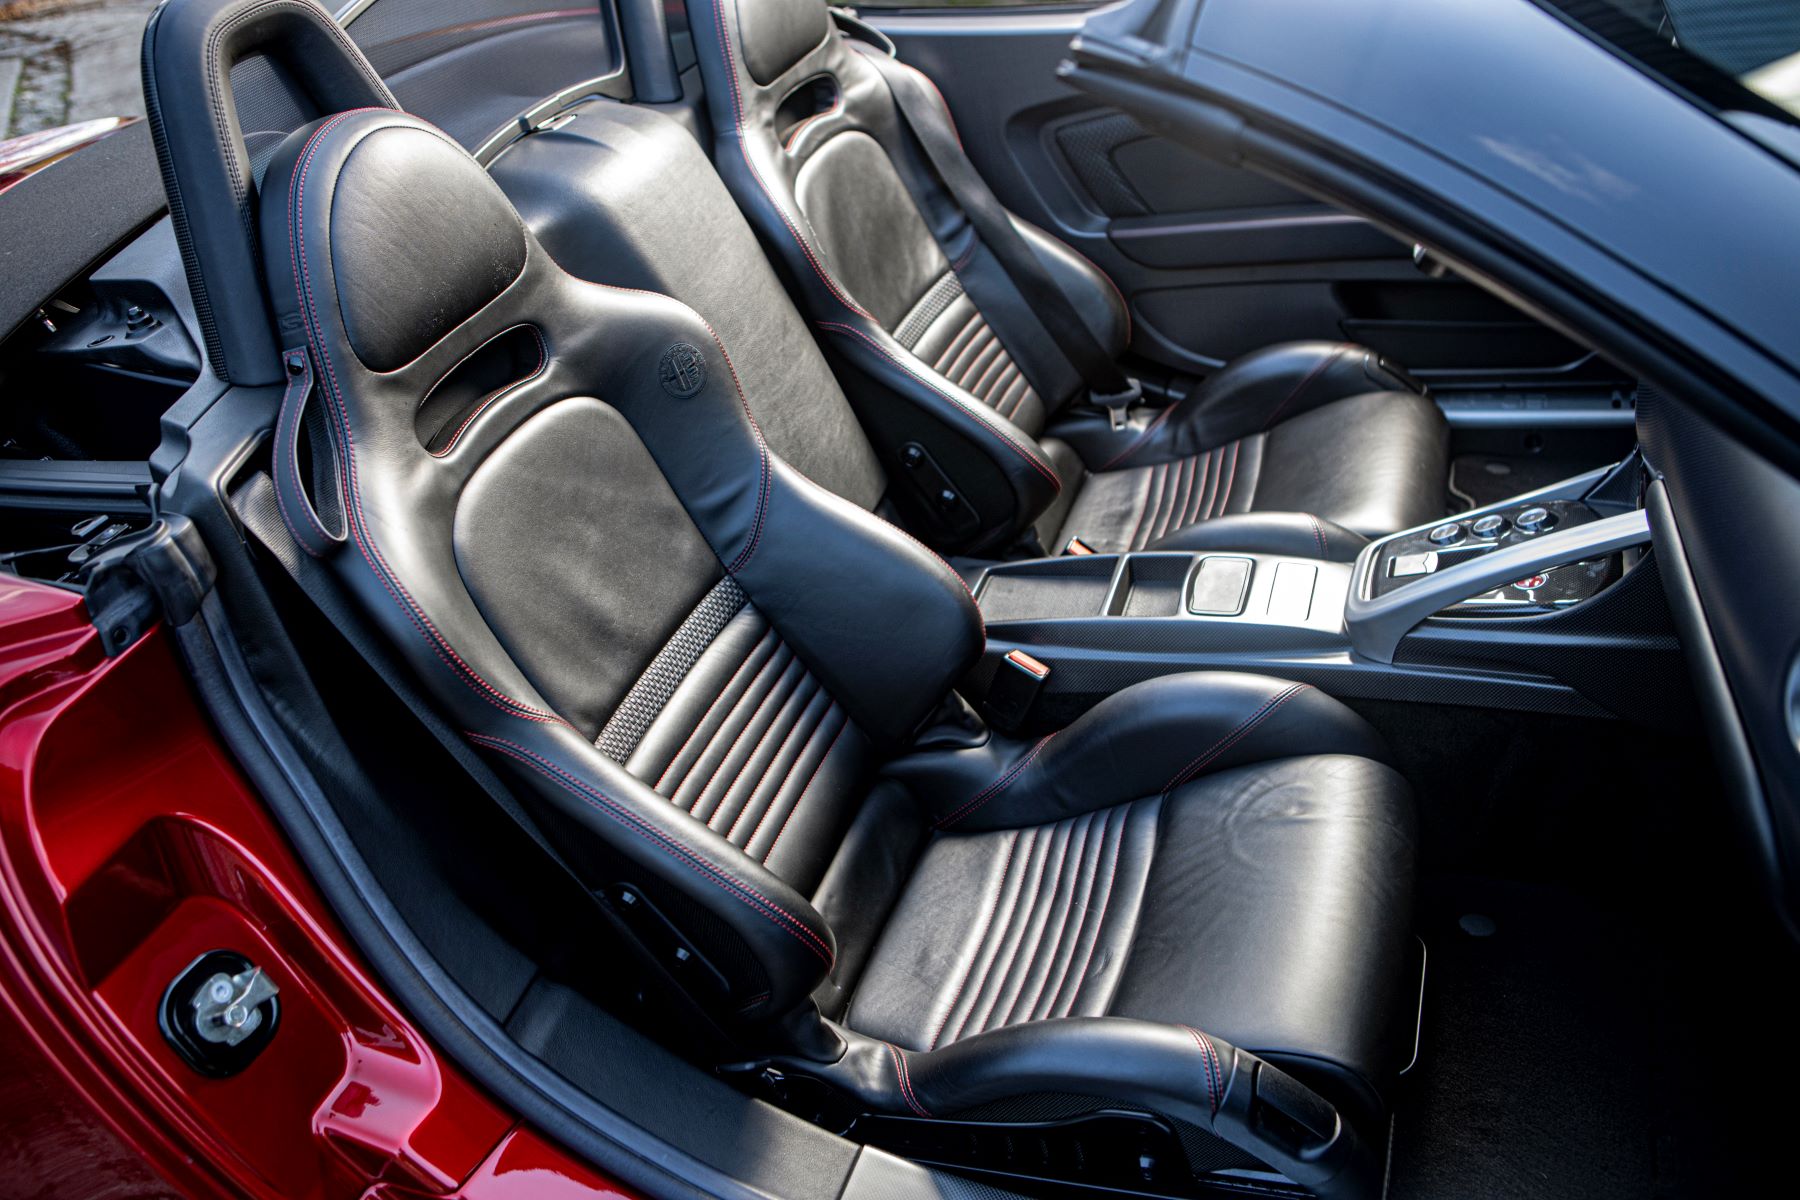 The upholstery seating material of a 2013 Alfa Romeo 8C Spyder